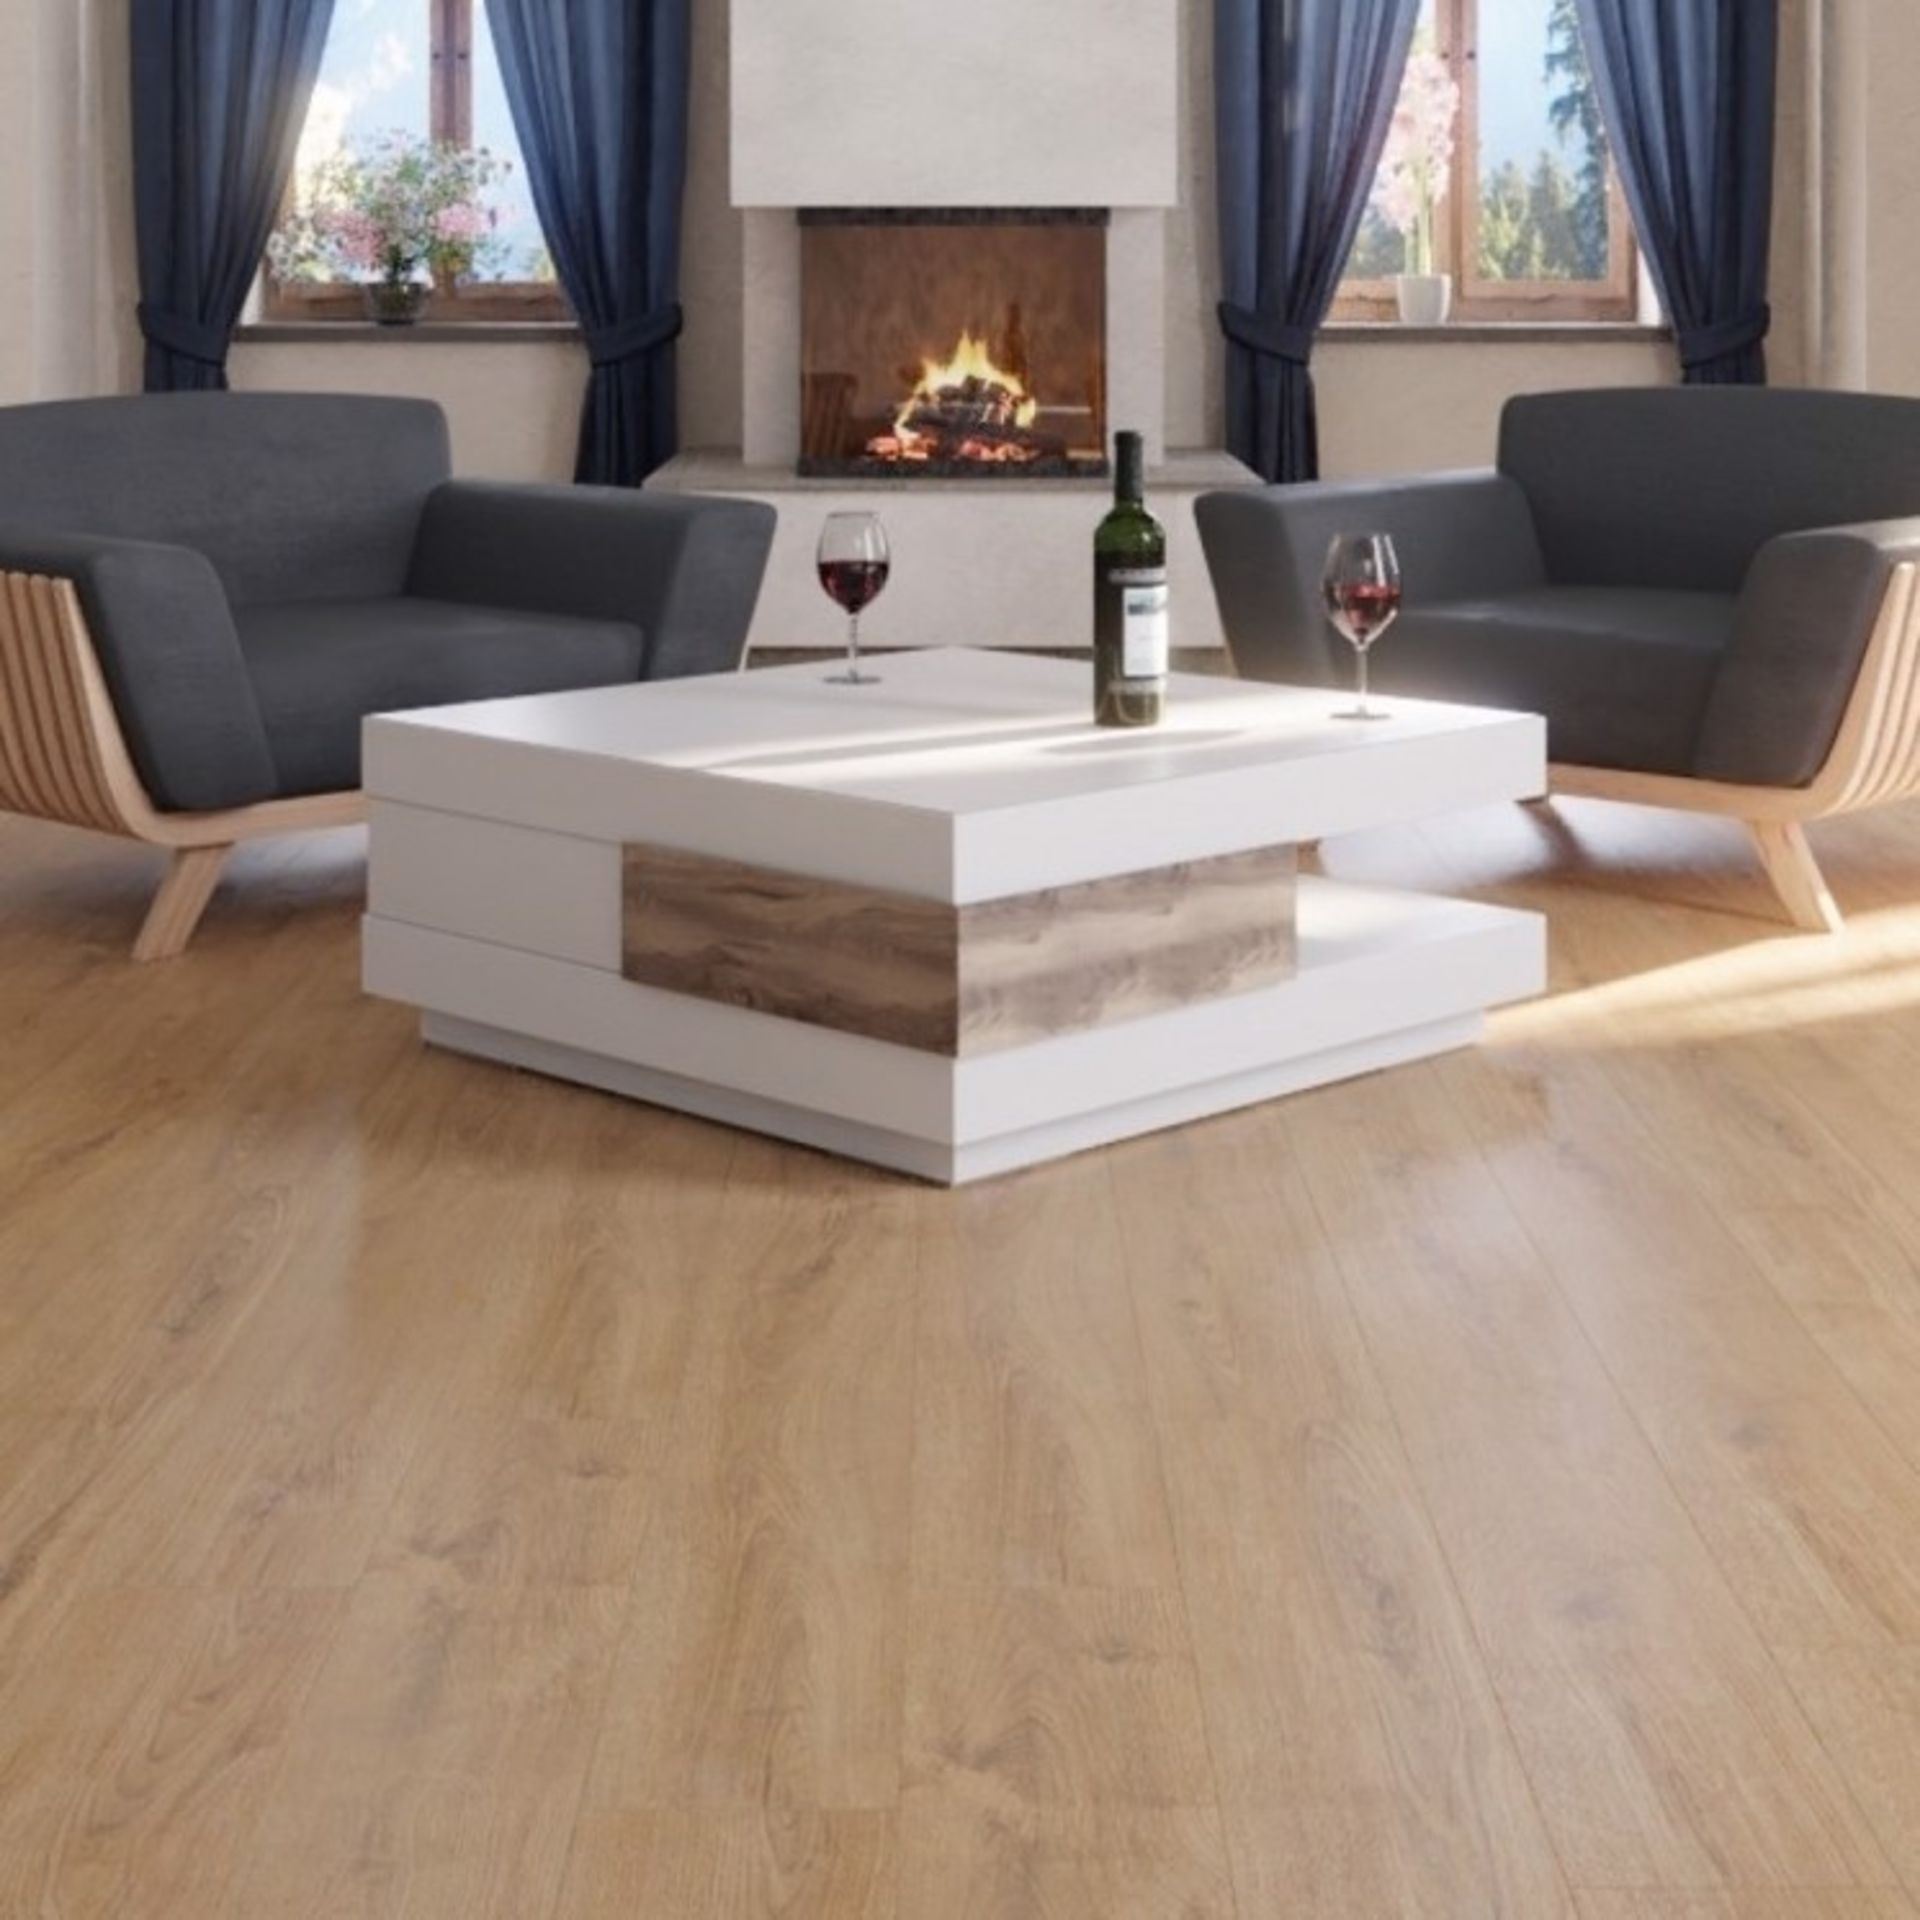 NEW 14.34m2 LAMINATE FLOORING SUMMER NATURAL OAK. With a warming natural oak tone, this floor is - Image 2 of 2